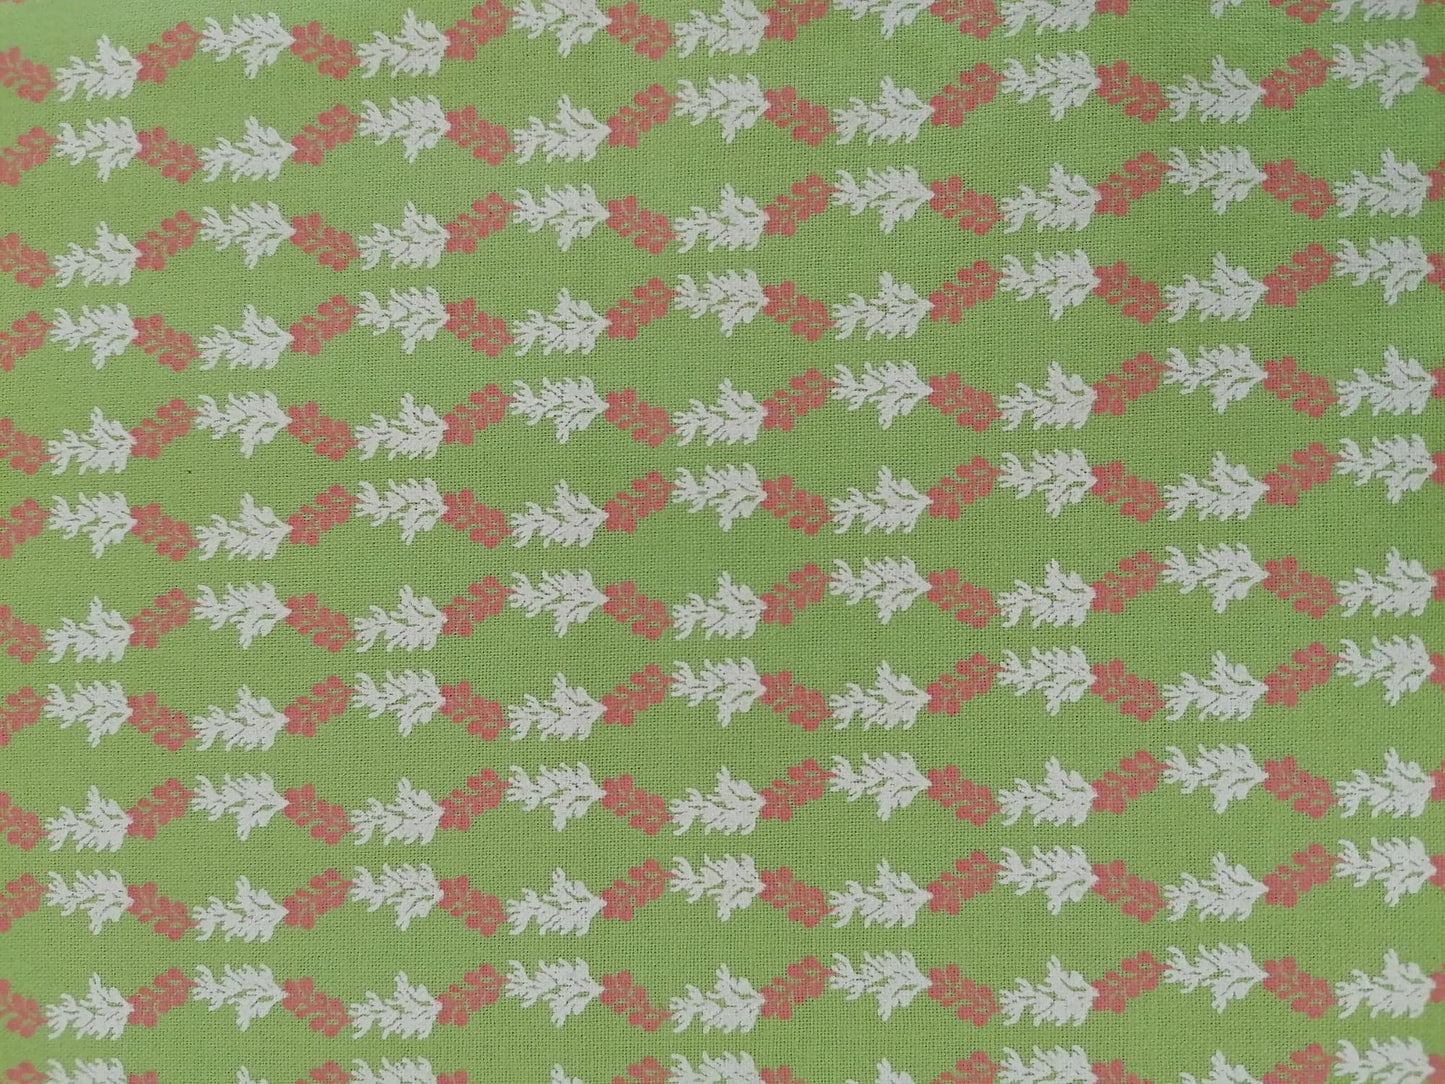 100% Cotton - Crafting & Quilting - Green/Pink/White - 44" Wide - Sold By the Metre